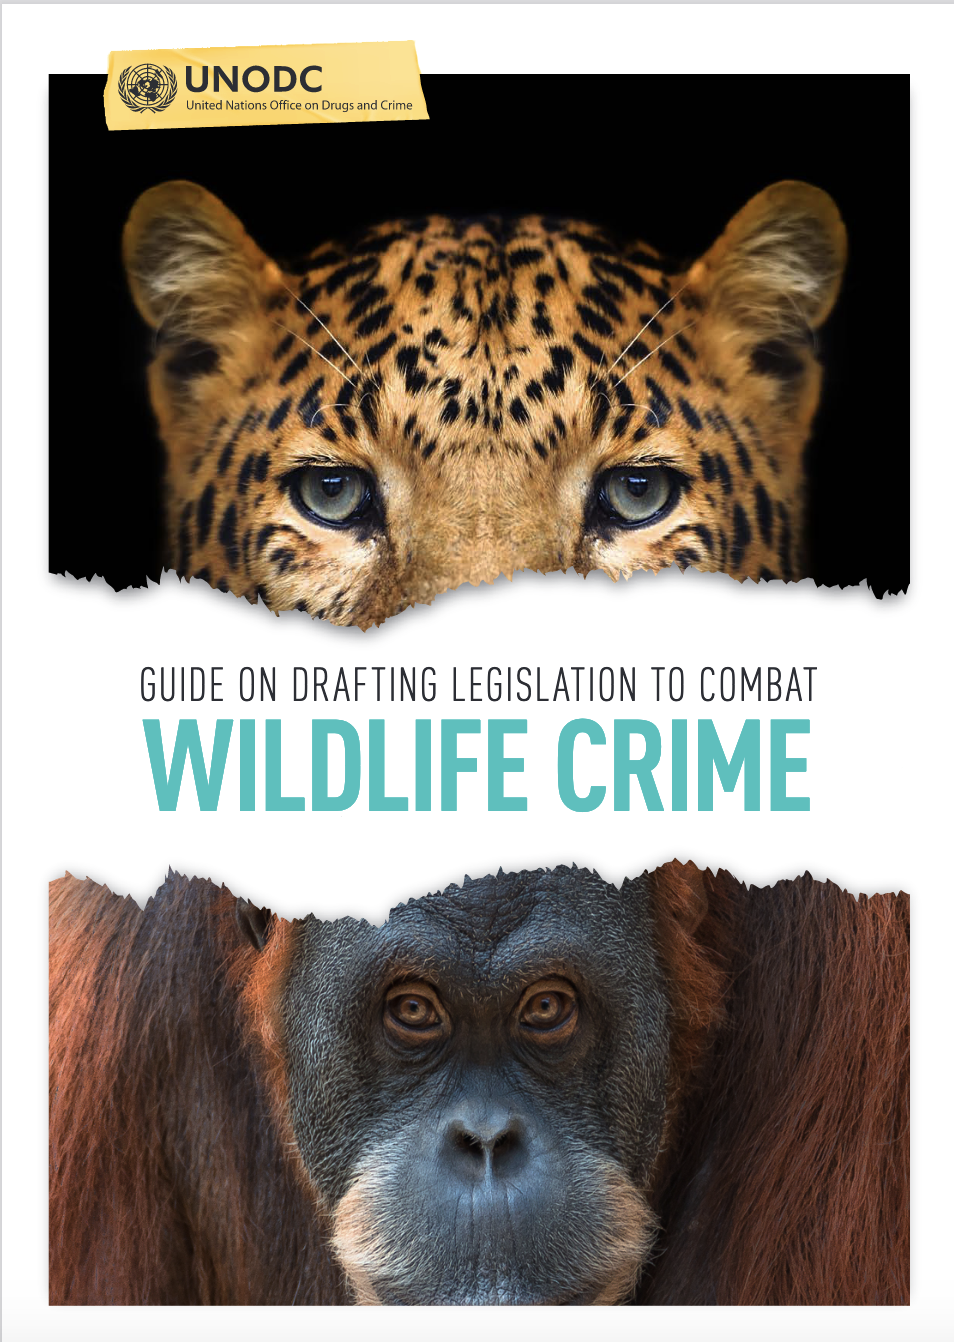 <div> </div>
<div style="text-align: center;">Guide on drafting legislation to combat wildlife crime<br />(<a href="https://www.unodc.org/documents/organized-crime/tools_and_publications/Wildlife_Crime_ebook.pdf">E</a> - <a href="https://www.unodc.org/documents/organized-crime/tools_and_publications/Wildlife-Crime_ebook_F.pdf">F</a> - <a href="/cld/uploads/pdf/Wildlife_Crime_ebook_S.pdf">S</a>)</div>